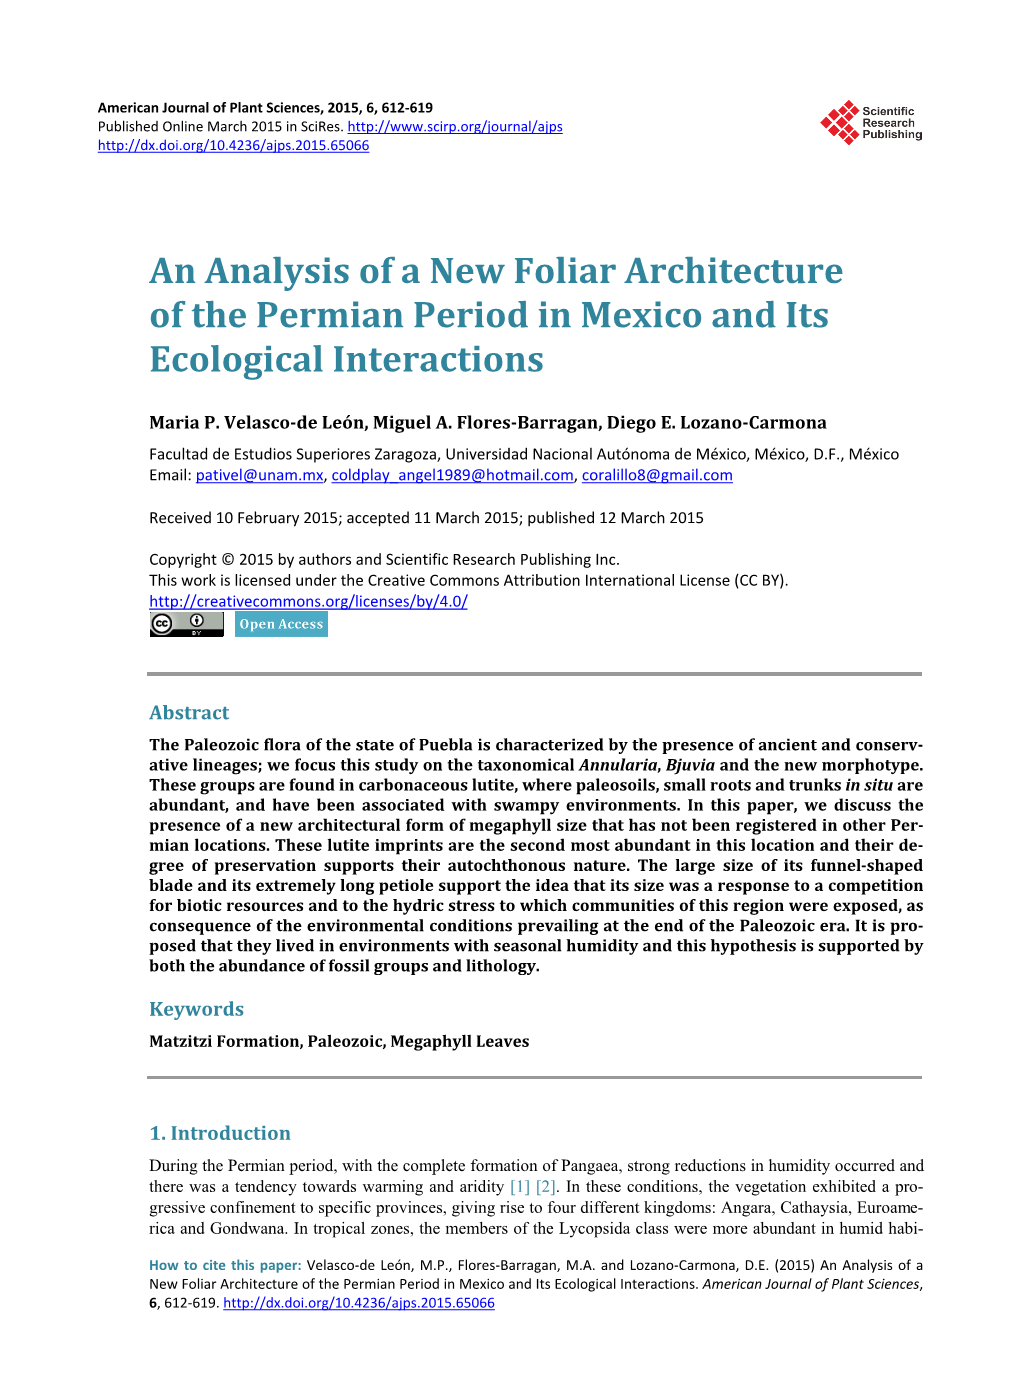 An Analysis of a New Foliar Architecture of the Permian Period in Mexico and Its Ecological Interactions